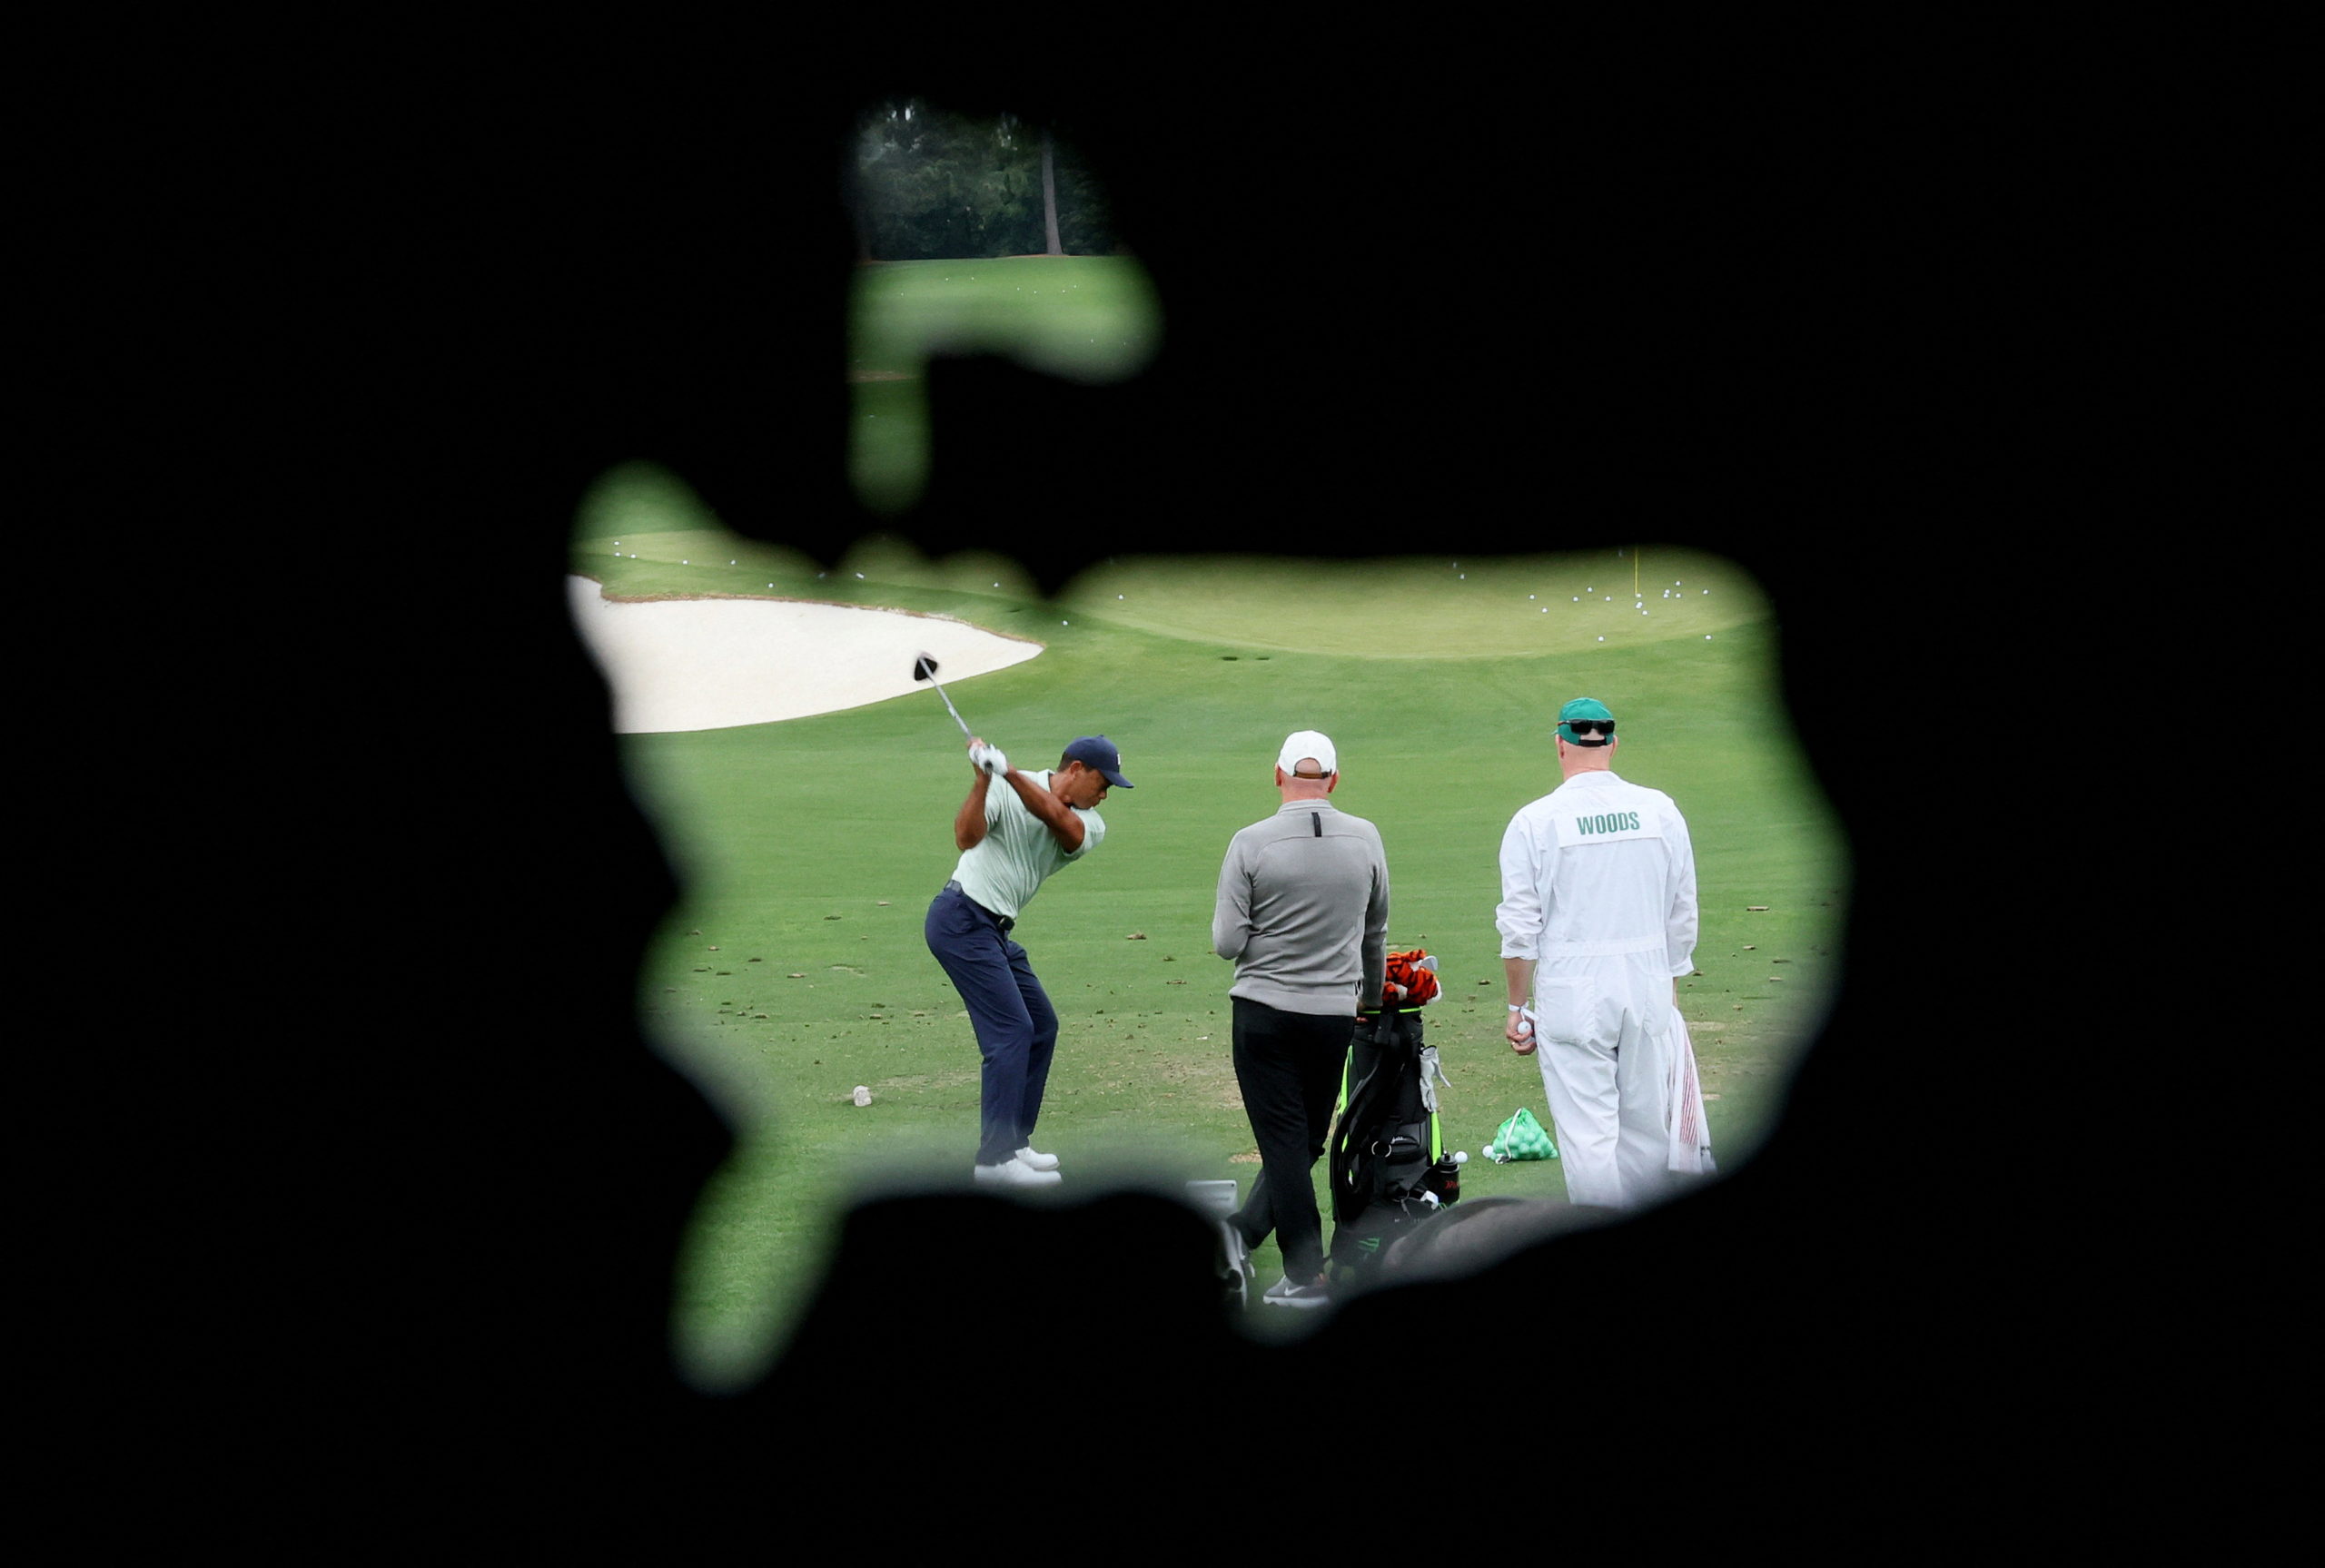 Golf - The Masters - Augusta National Golf Club - Augusta, Georgia, U.S. - April 5, 2022 Tiger Woods of the U.S. is seen through the logo of the Augusta National Golf Club hitting a shot on the practice tee 